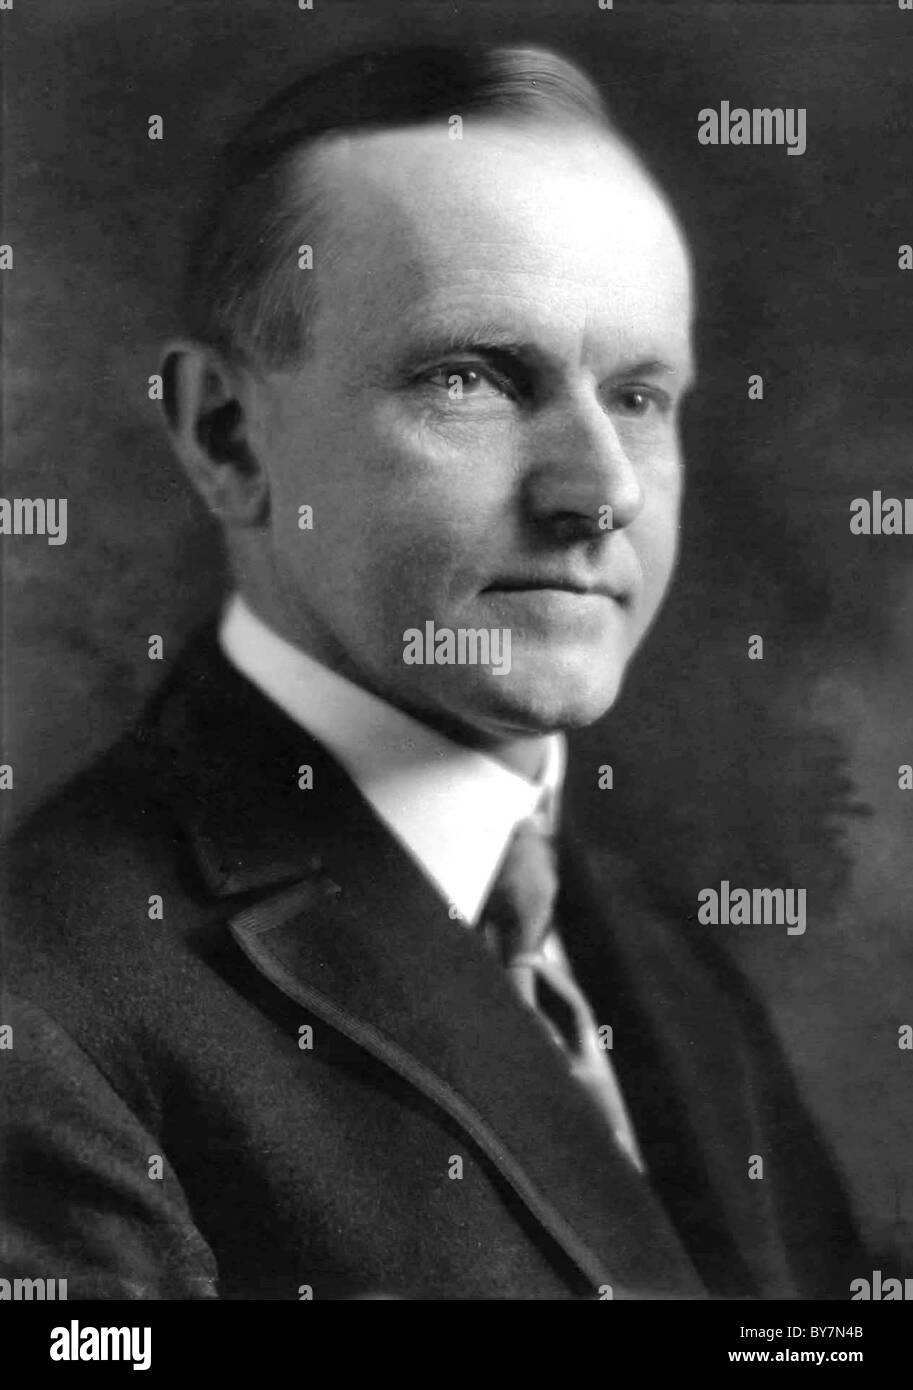 Calvin Coolidge was the 30th President of the United States. Stock Photo